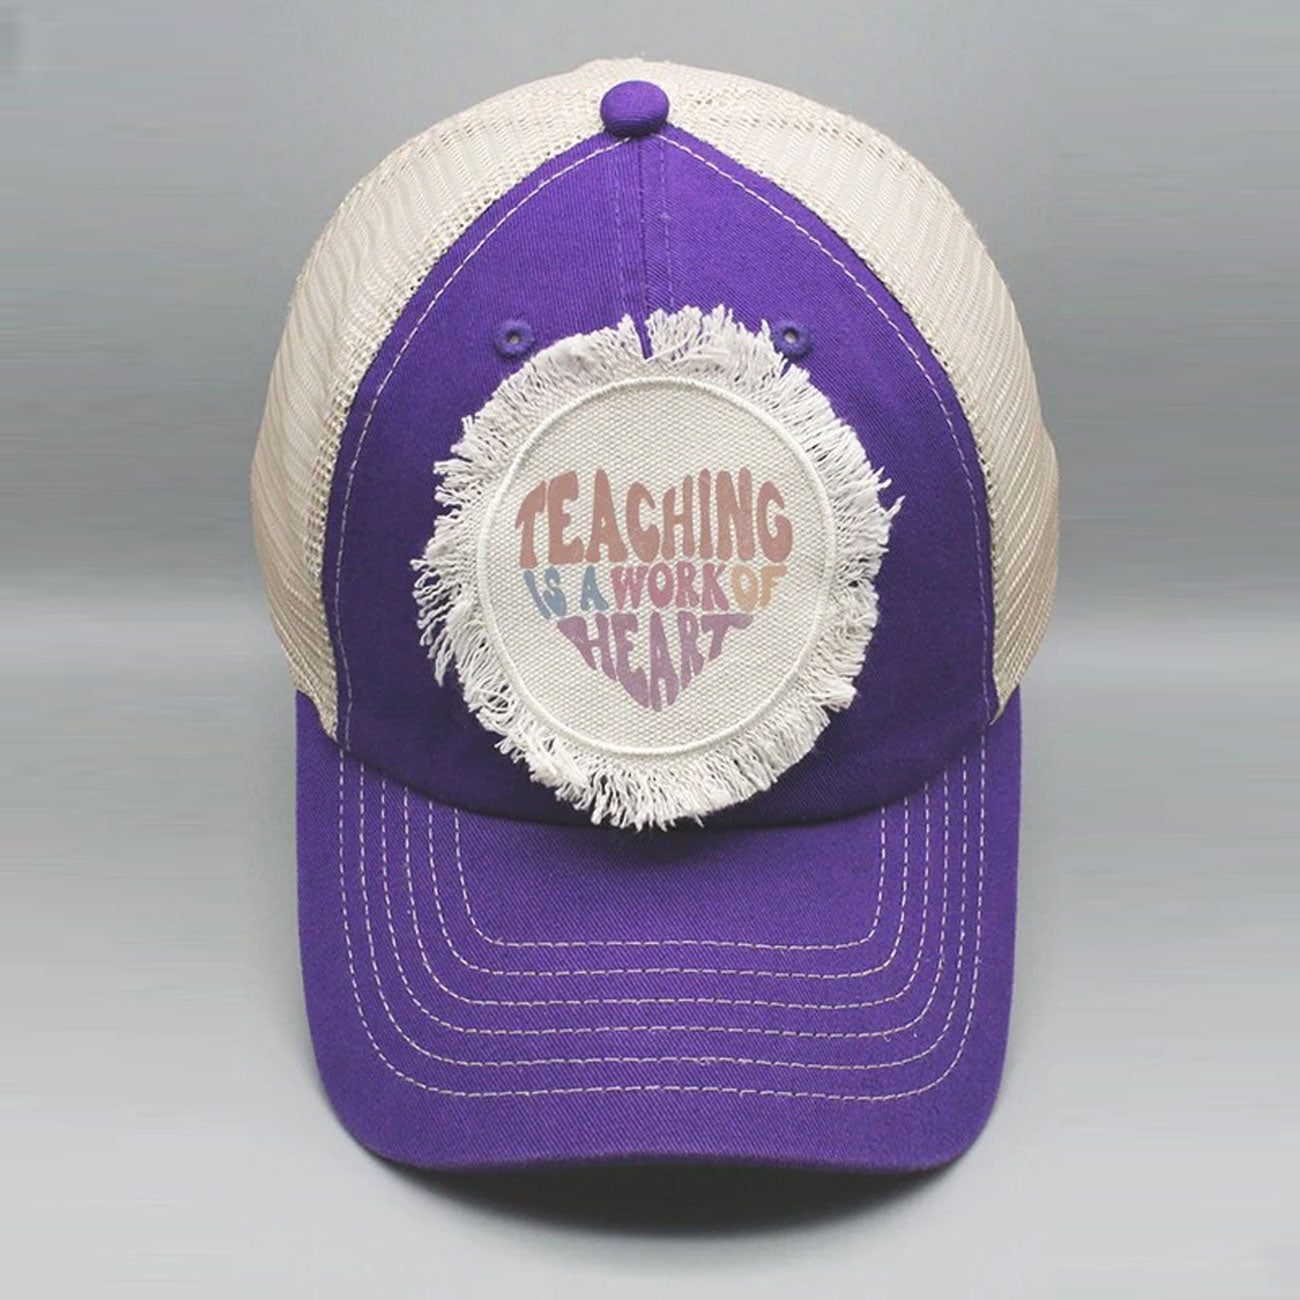 Teaching Work of Heart Light Colored Patch Hat